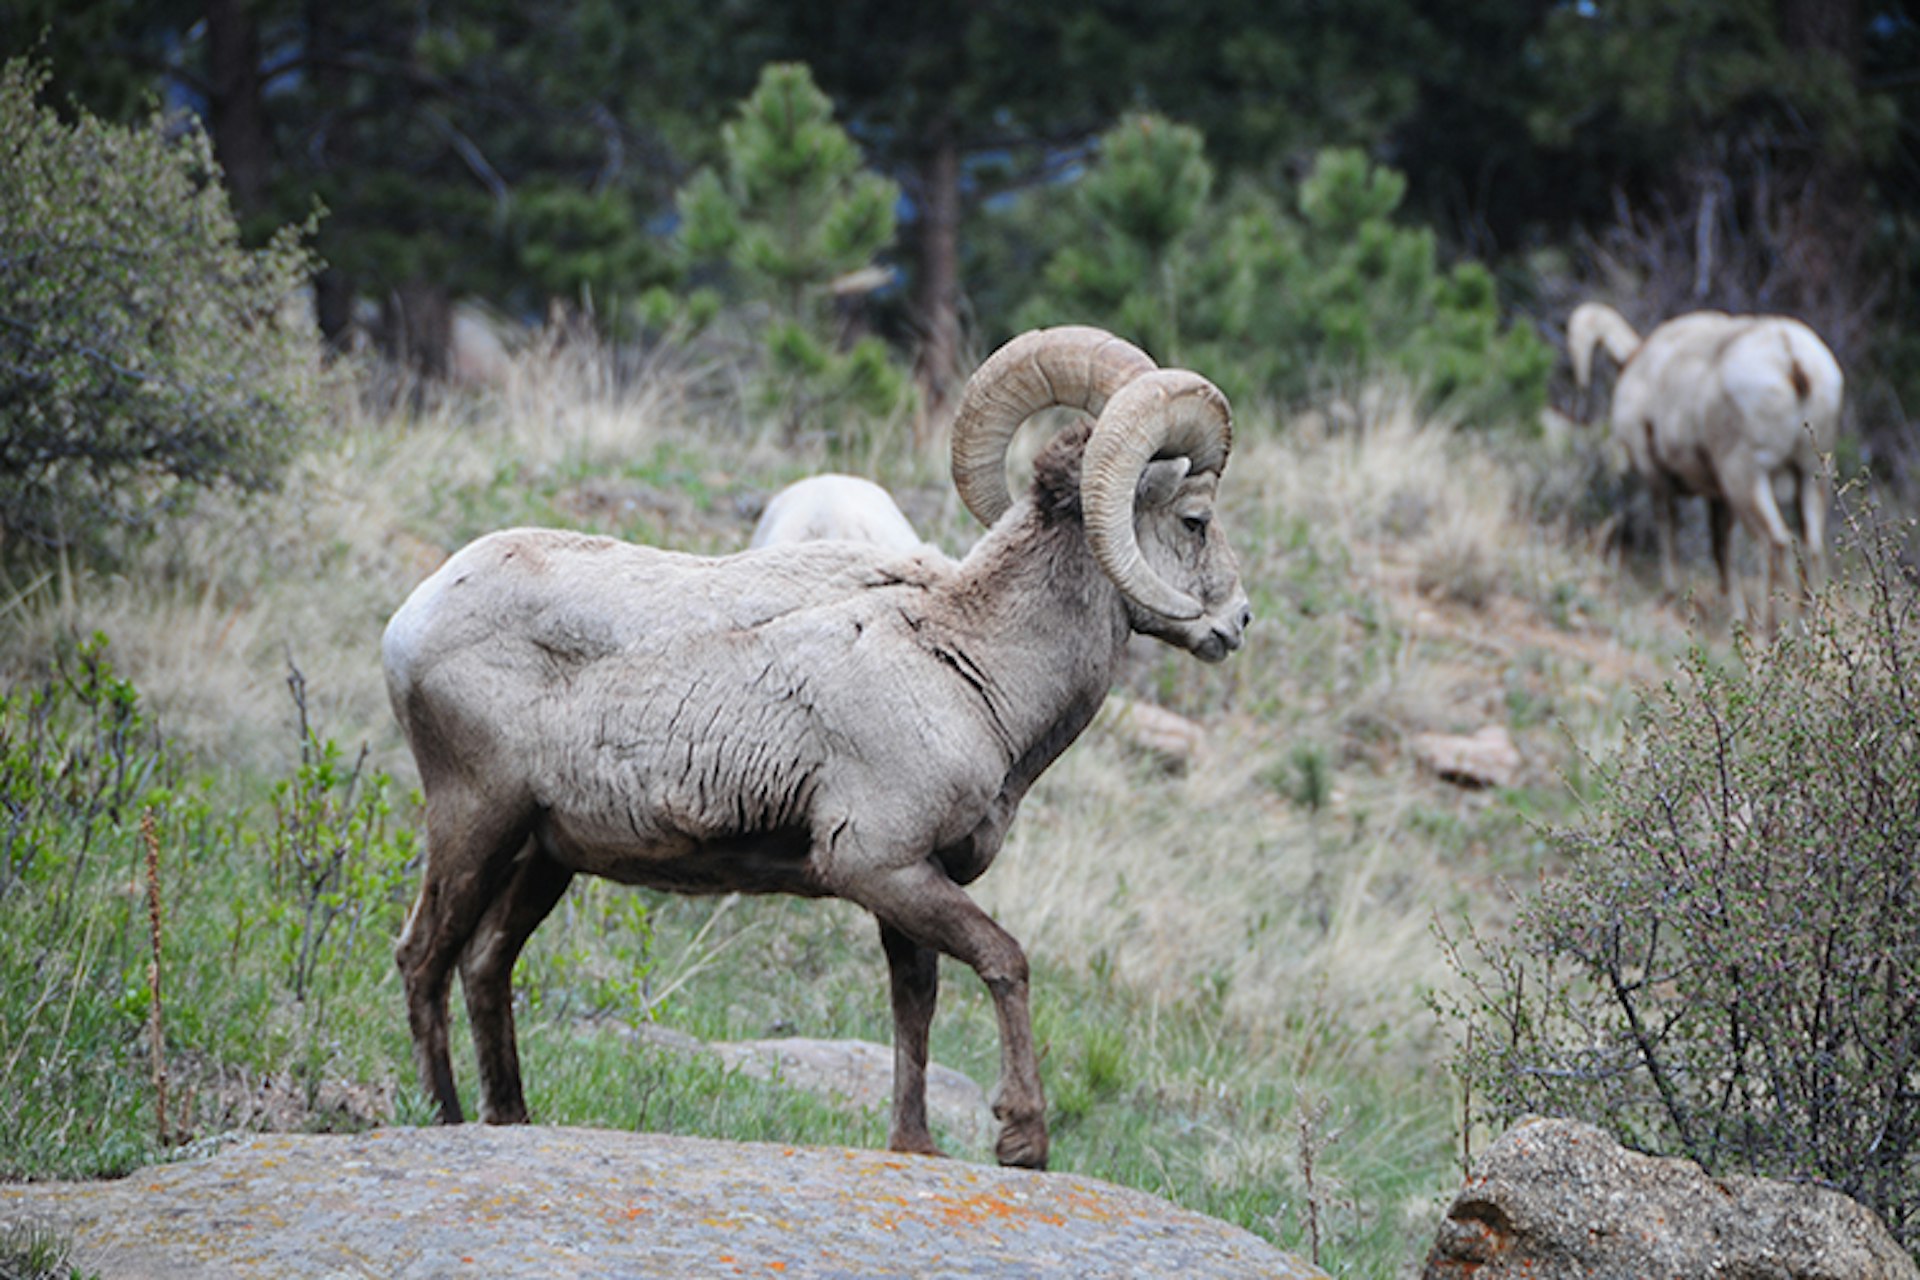 Although disease, hunting and habitat loss threatened to drive bighorn sheep into extinction, the species is making a comeback. Image by Jasen Miller / CC BY 2.0